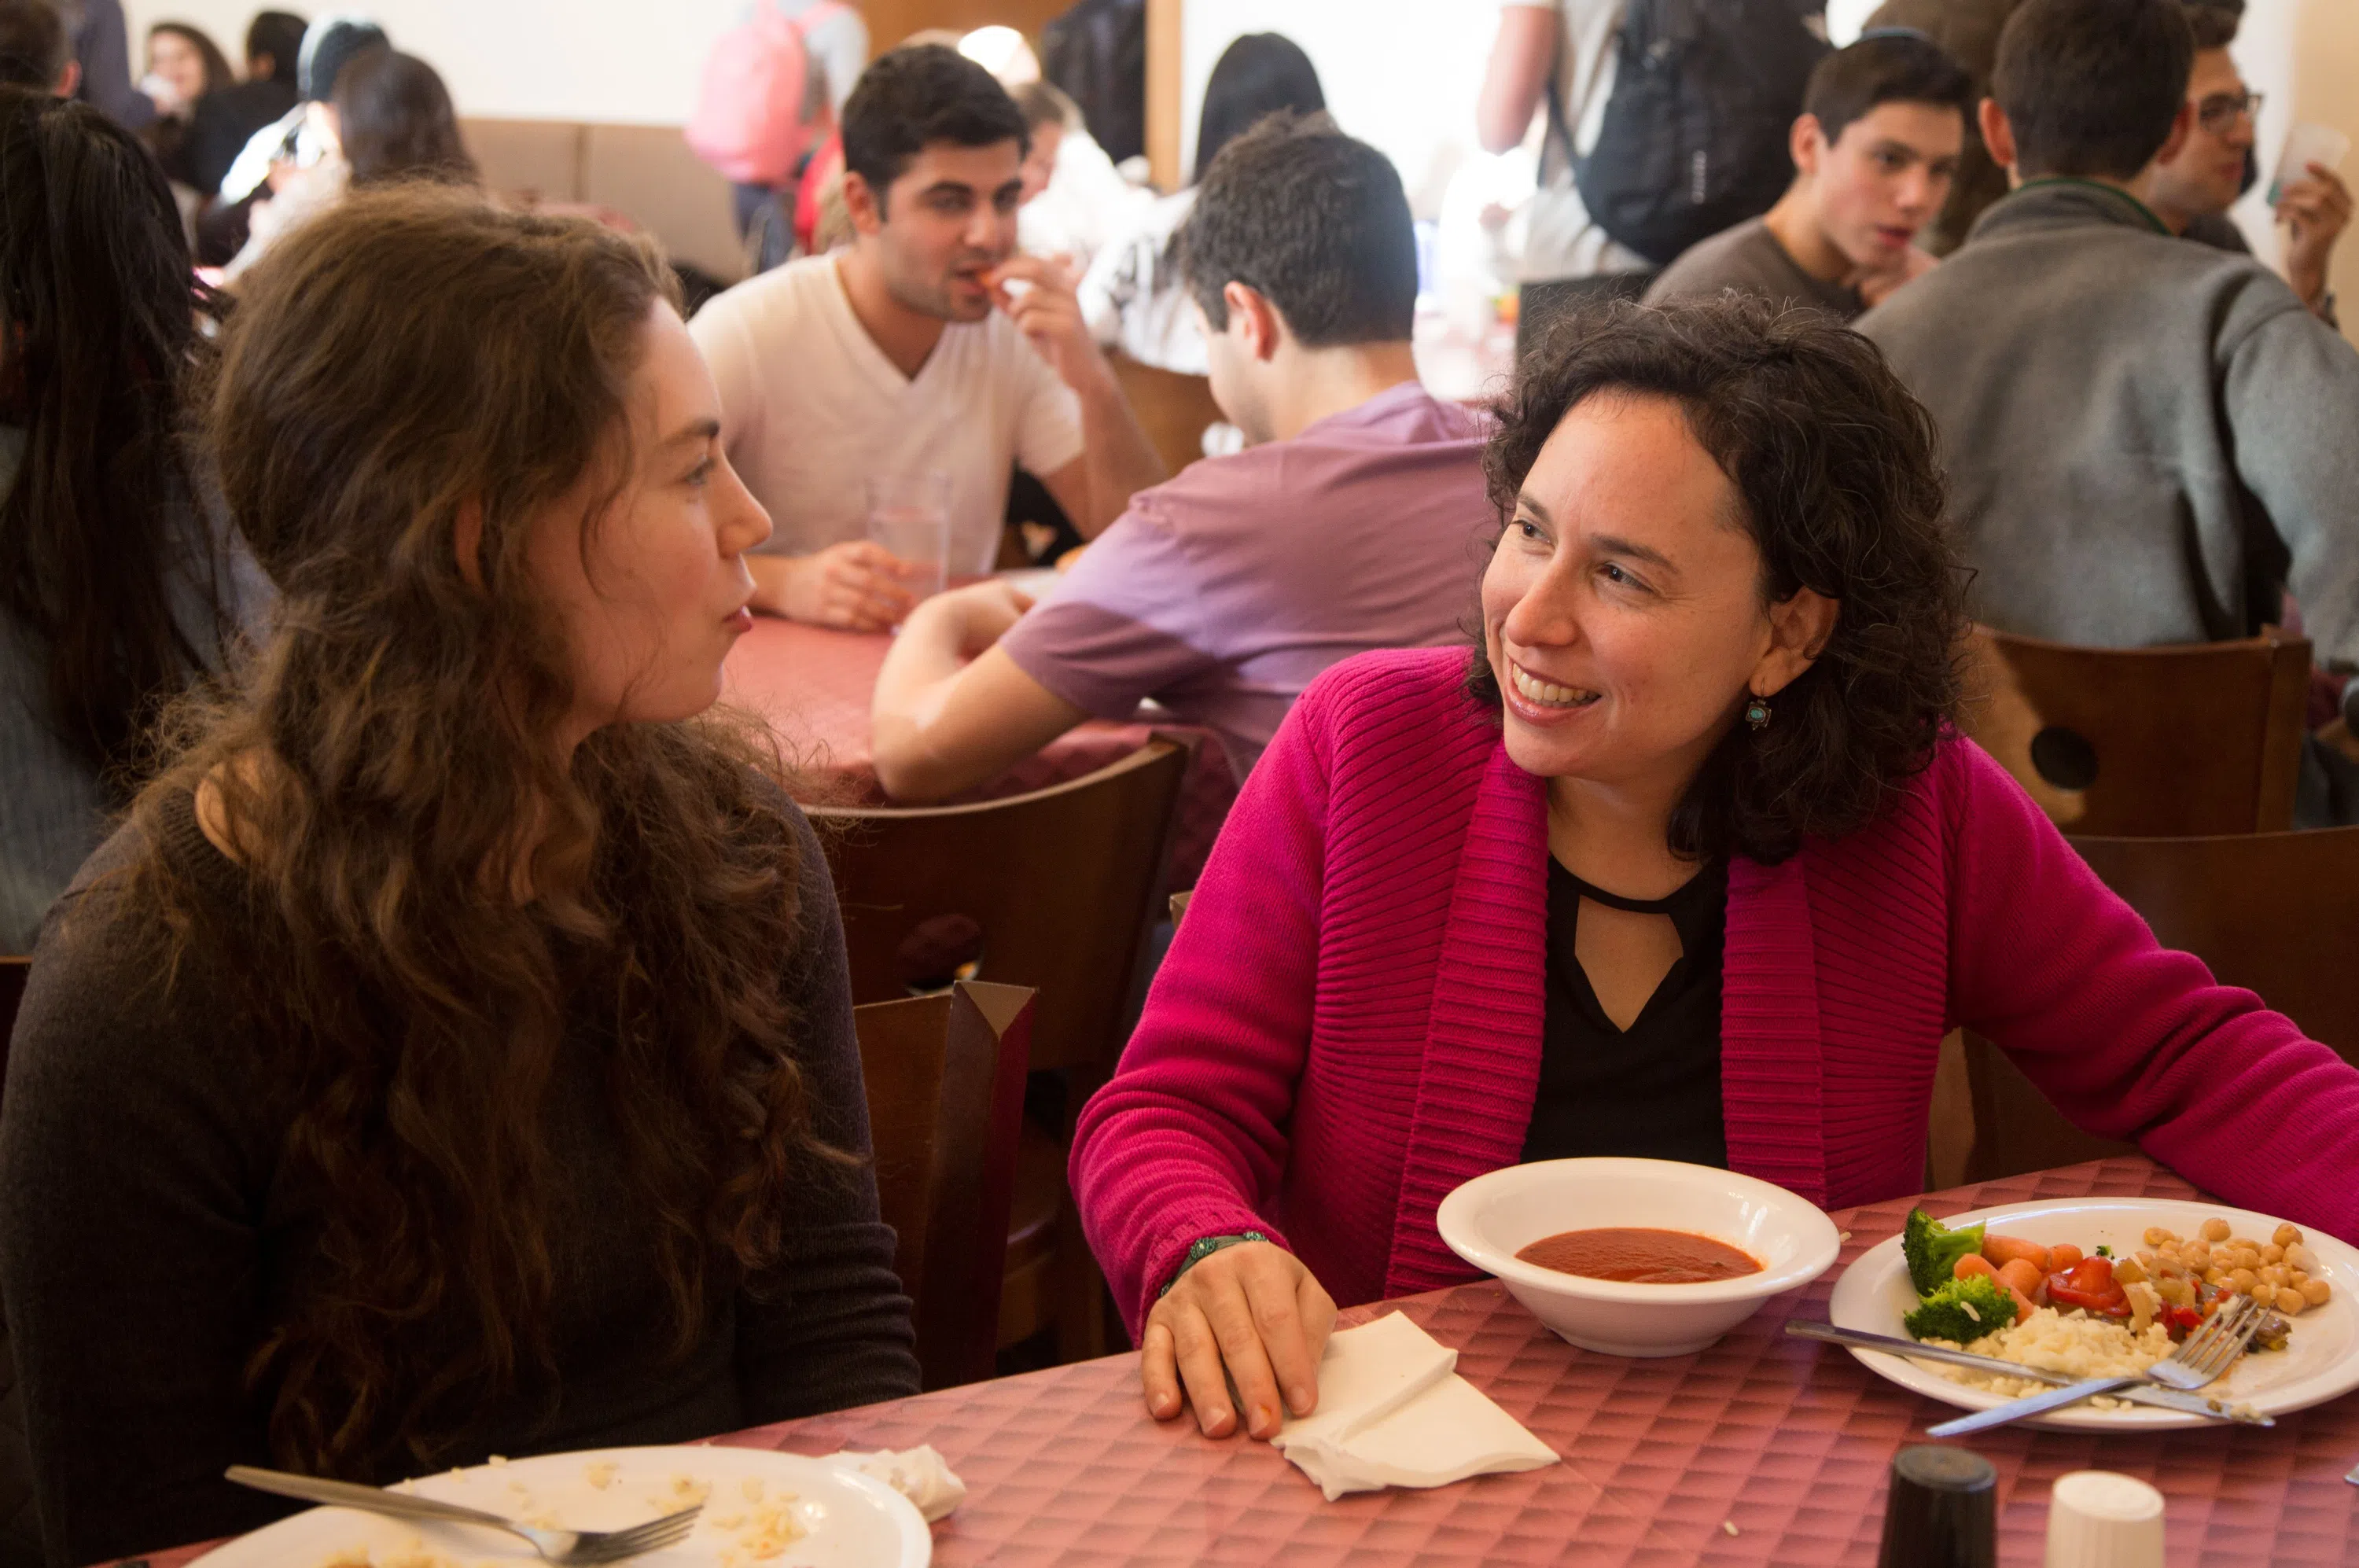 Rabbi Julie Roth and student eating in the dining hall